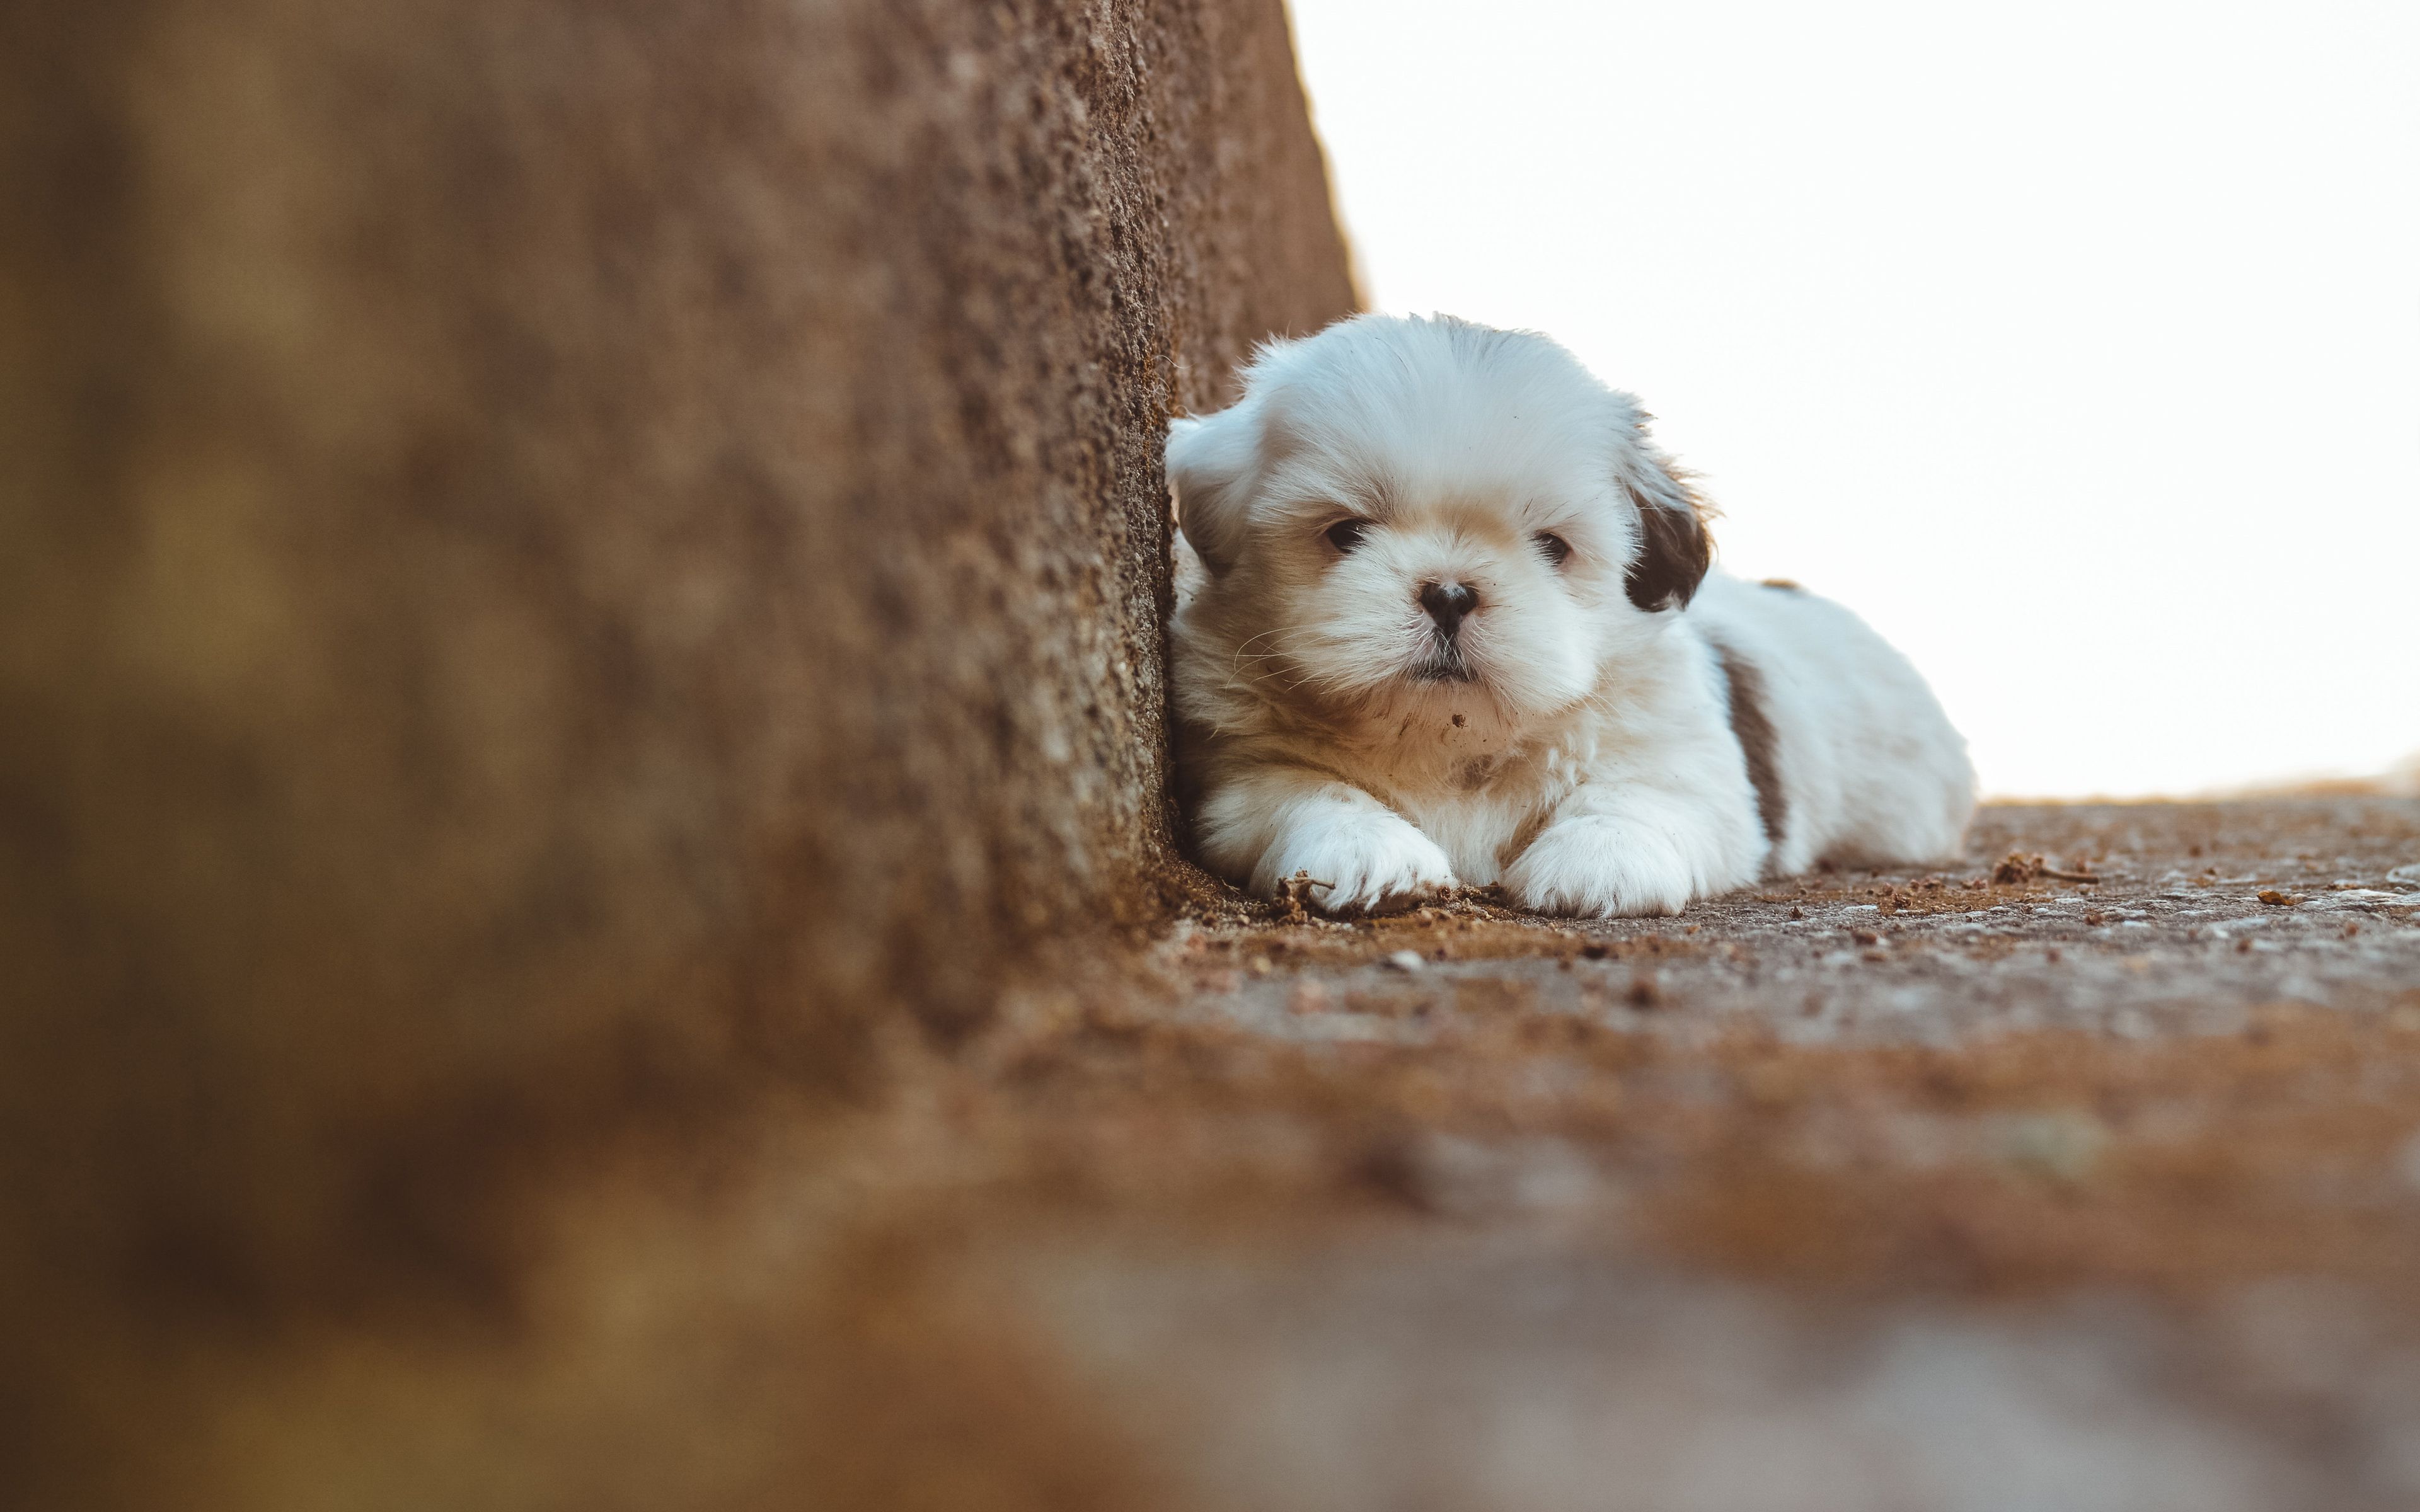 Download wallpaper 4k, Shih Tzu, puppy, fluffy dog, pets, dogs, cute animals, Shih tzu Dog for desktop with resolution 3840x2400. High Quality HD picture wallpaper